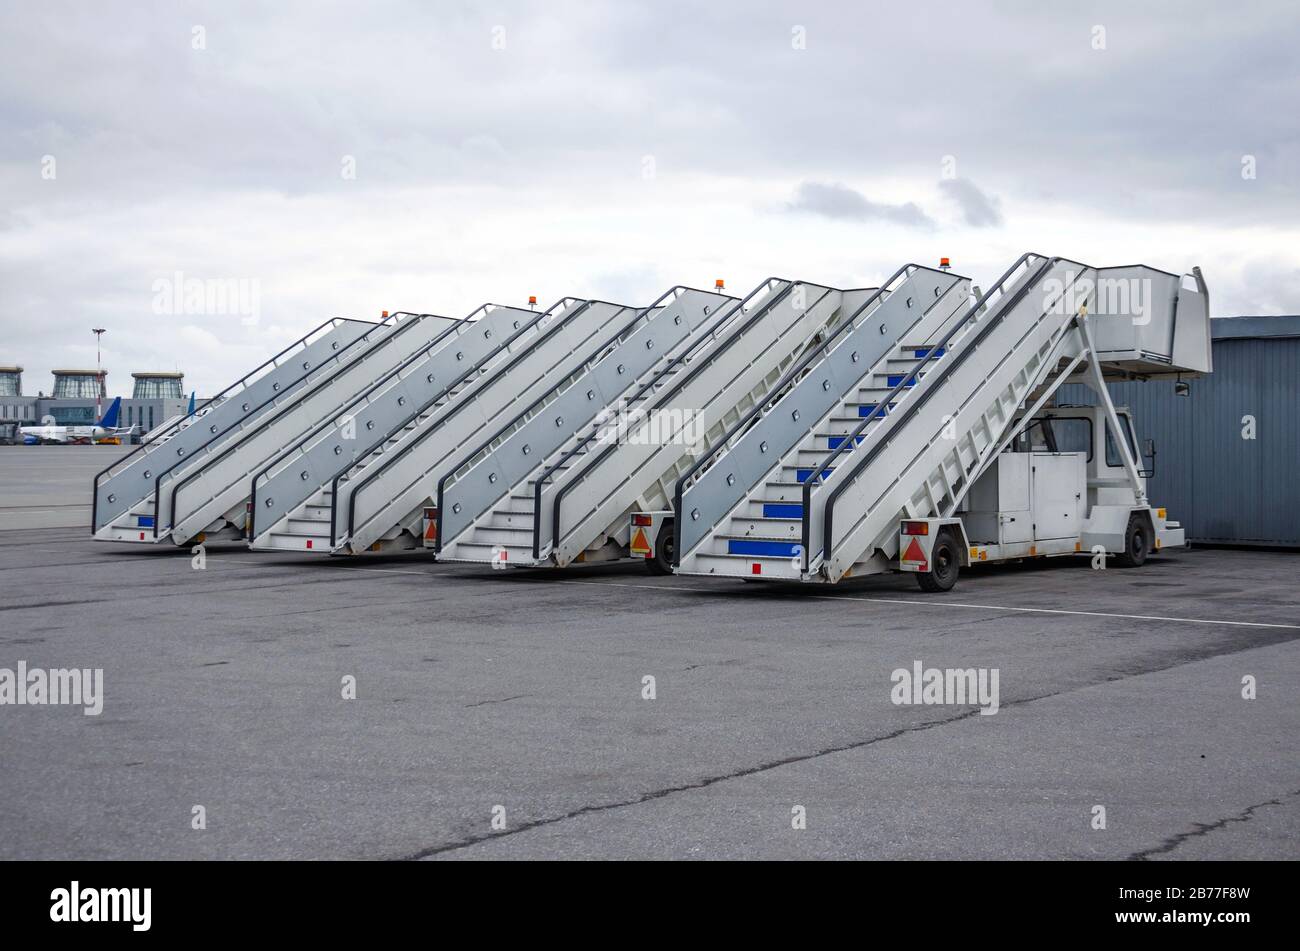 A row of gangways for boarding and alighting passengers from an airplane parked at the airport Stock Photo